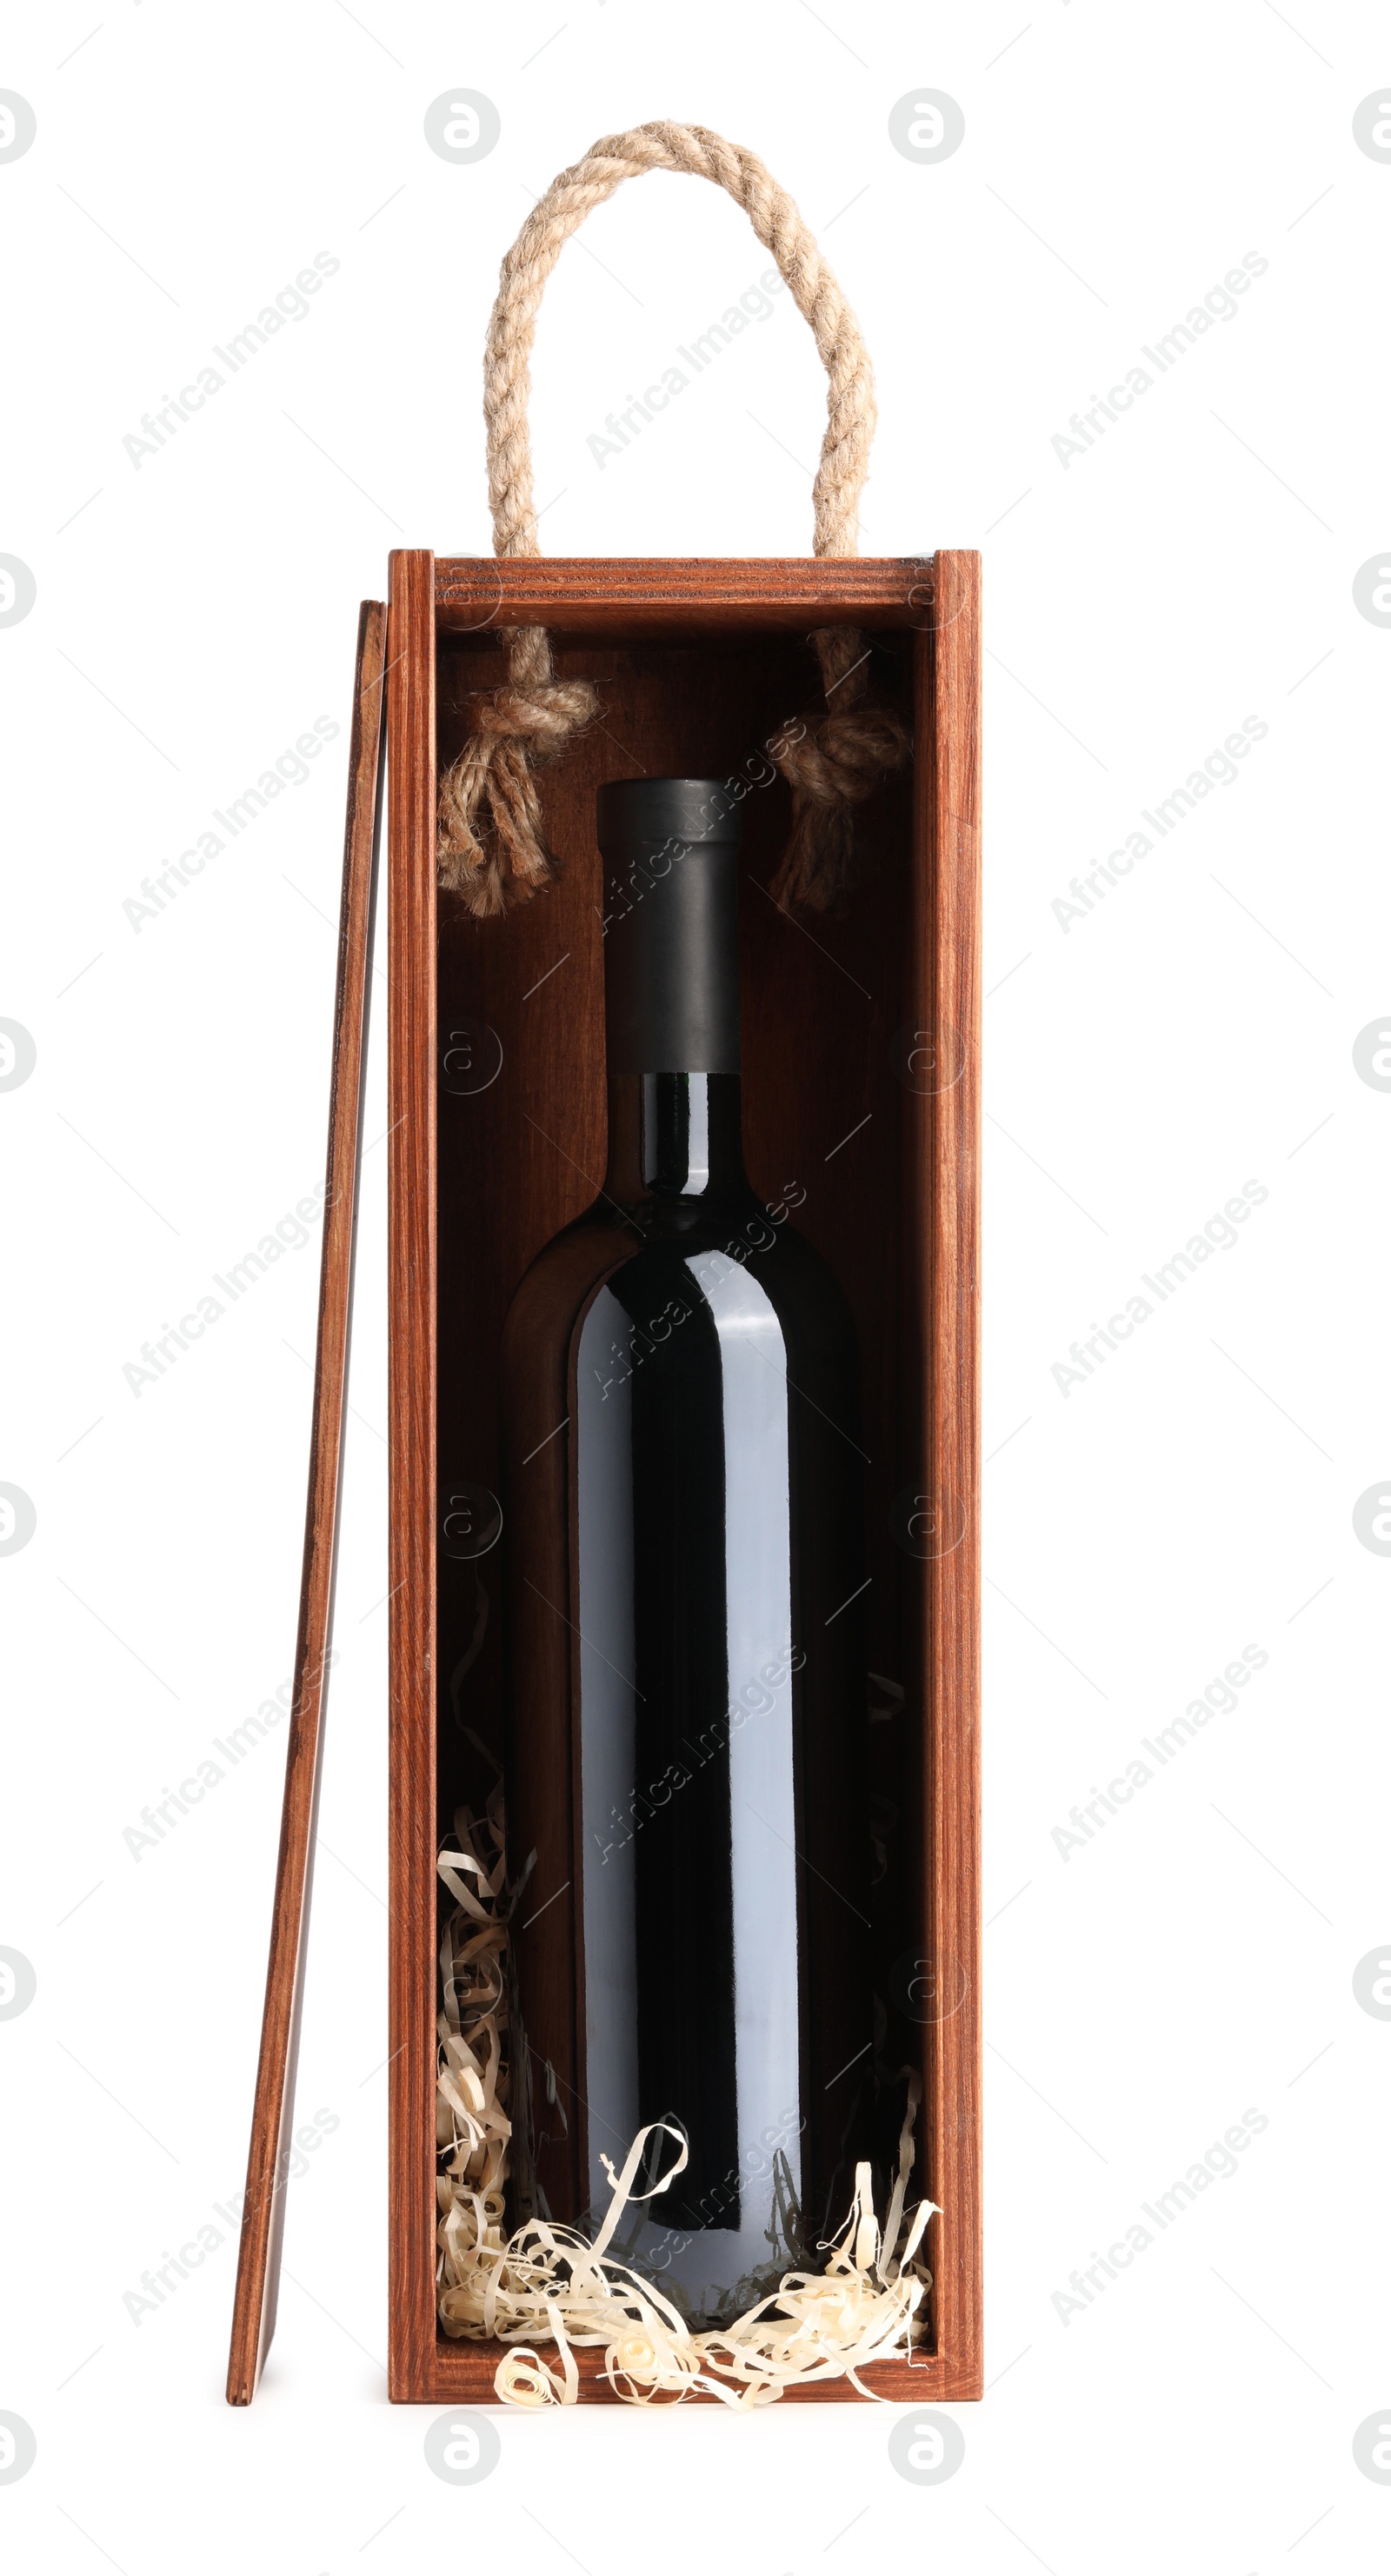 Photo of Wooden gift box with wine isolated on white